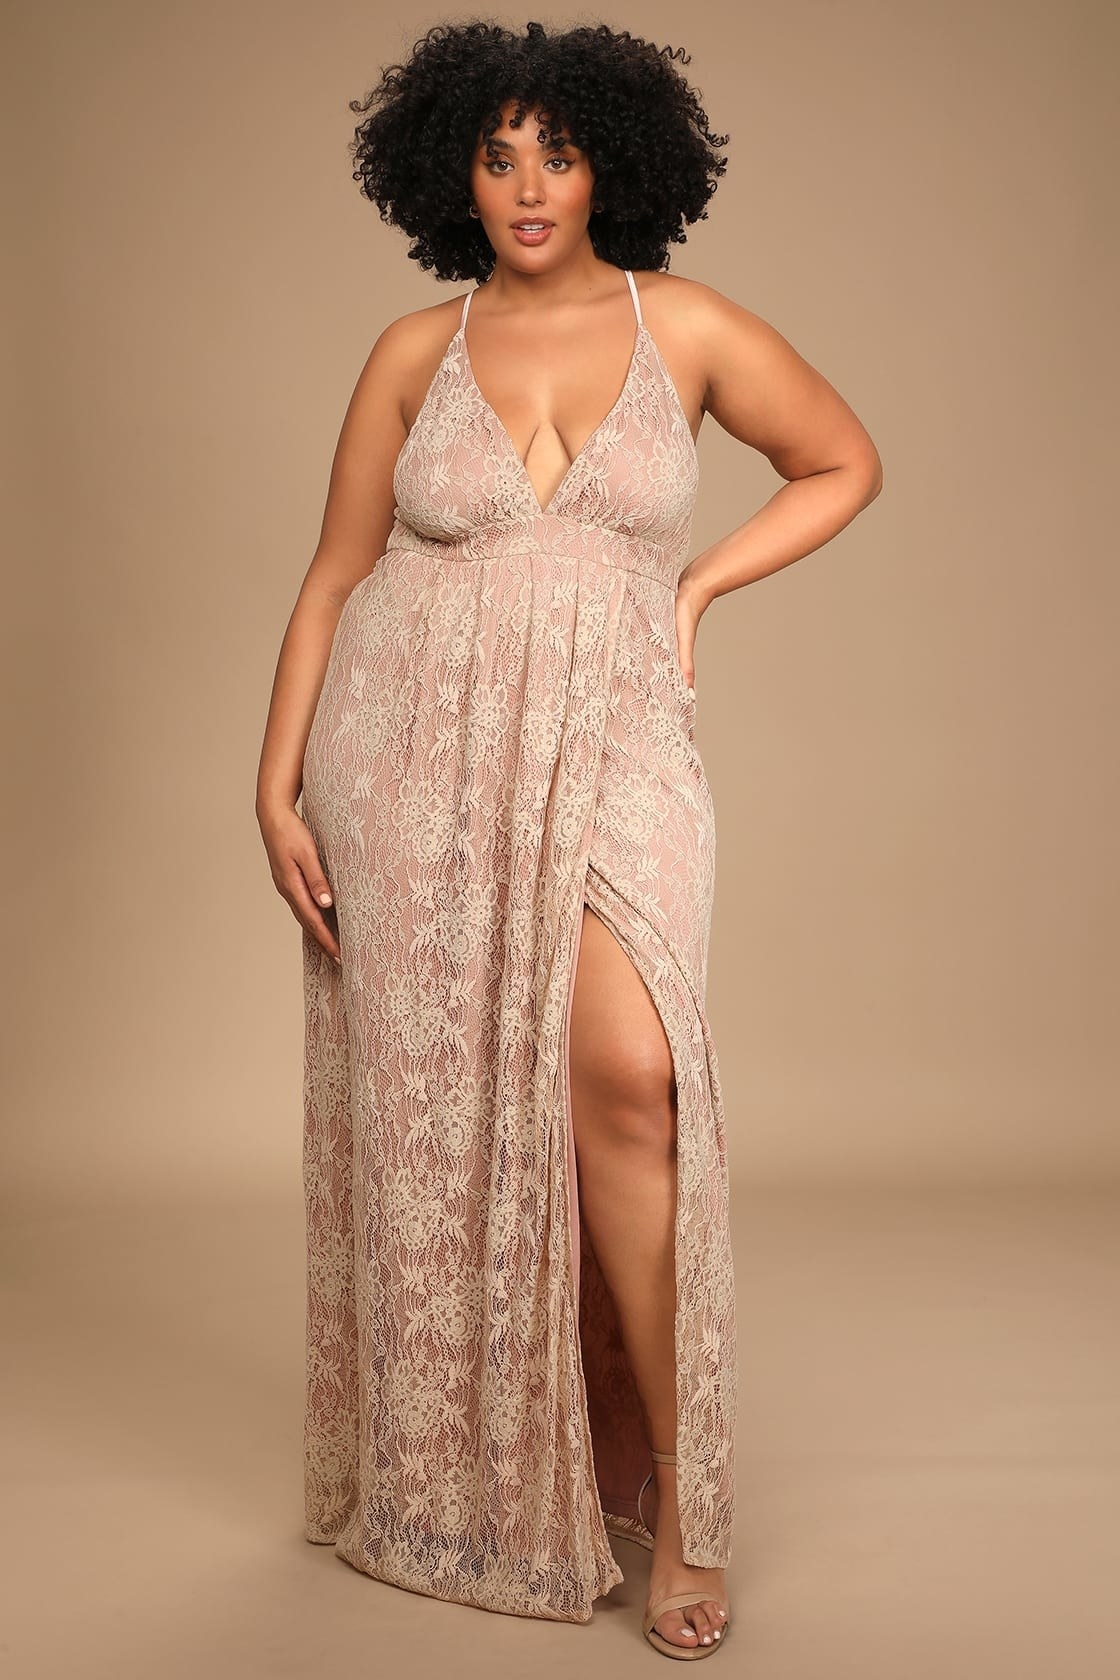 model in dusty rose lace maxi dress with v-neck, spaghetti straps, and a high slit